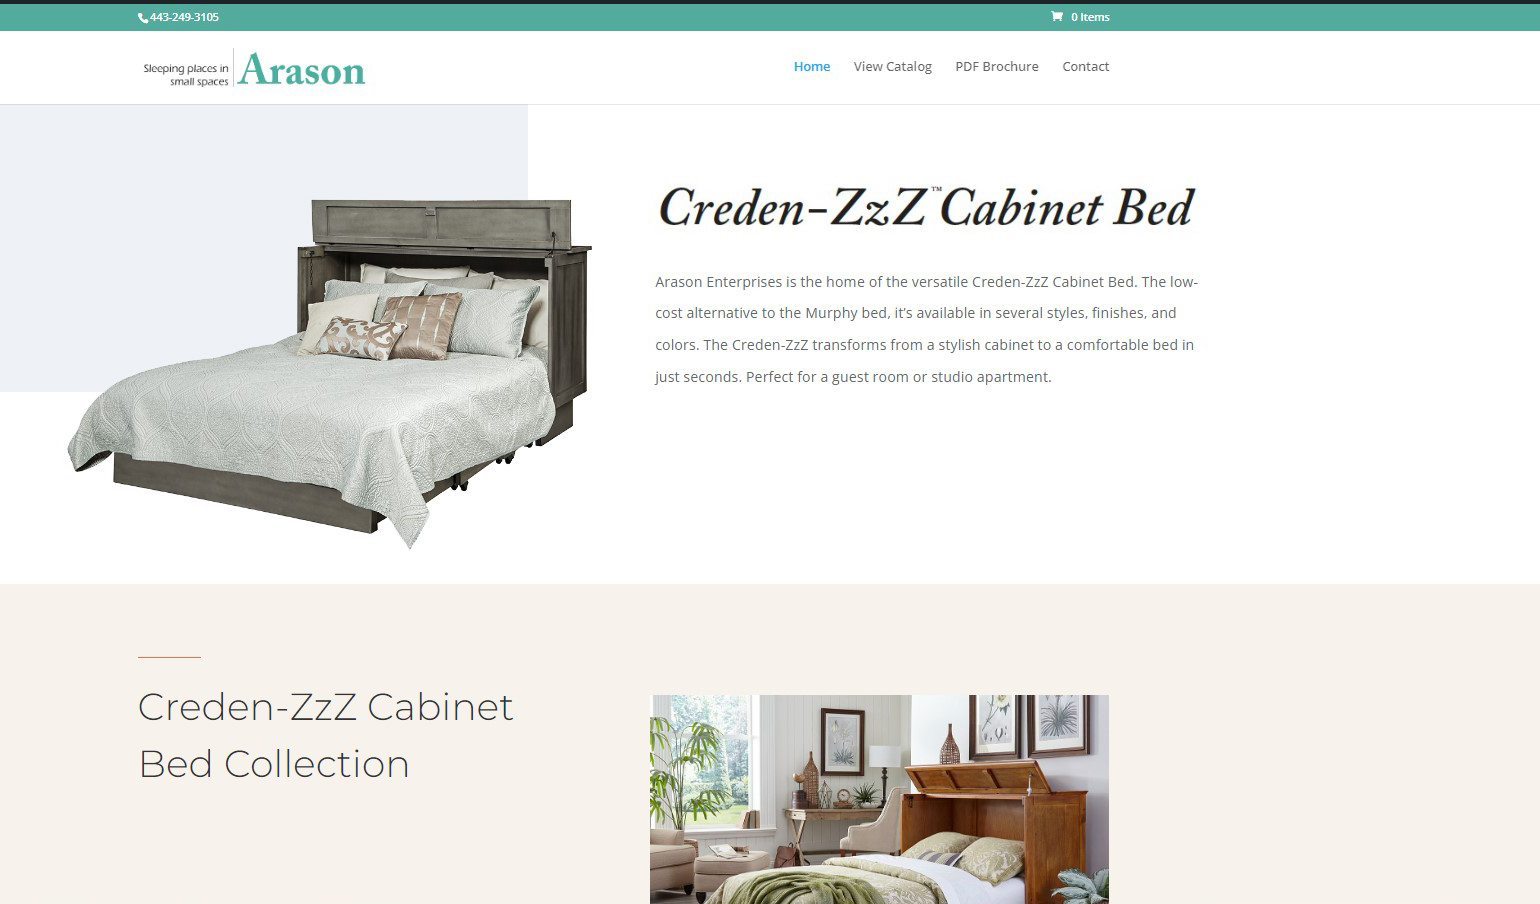 fu-chest.com - home of the Creden-ZzZ Cabinet Bed